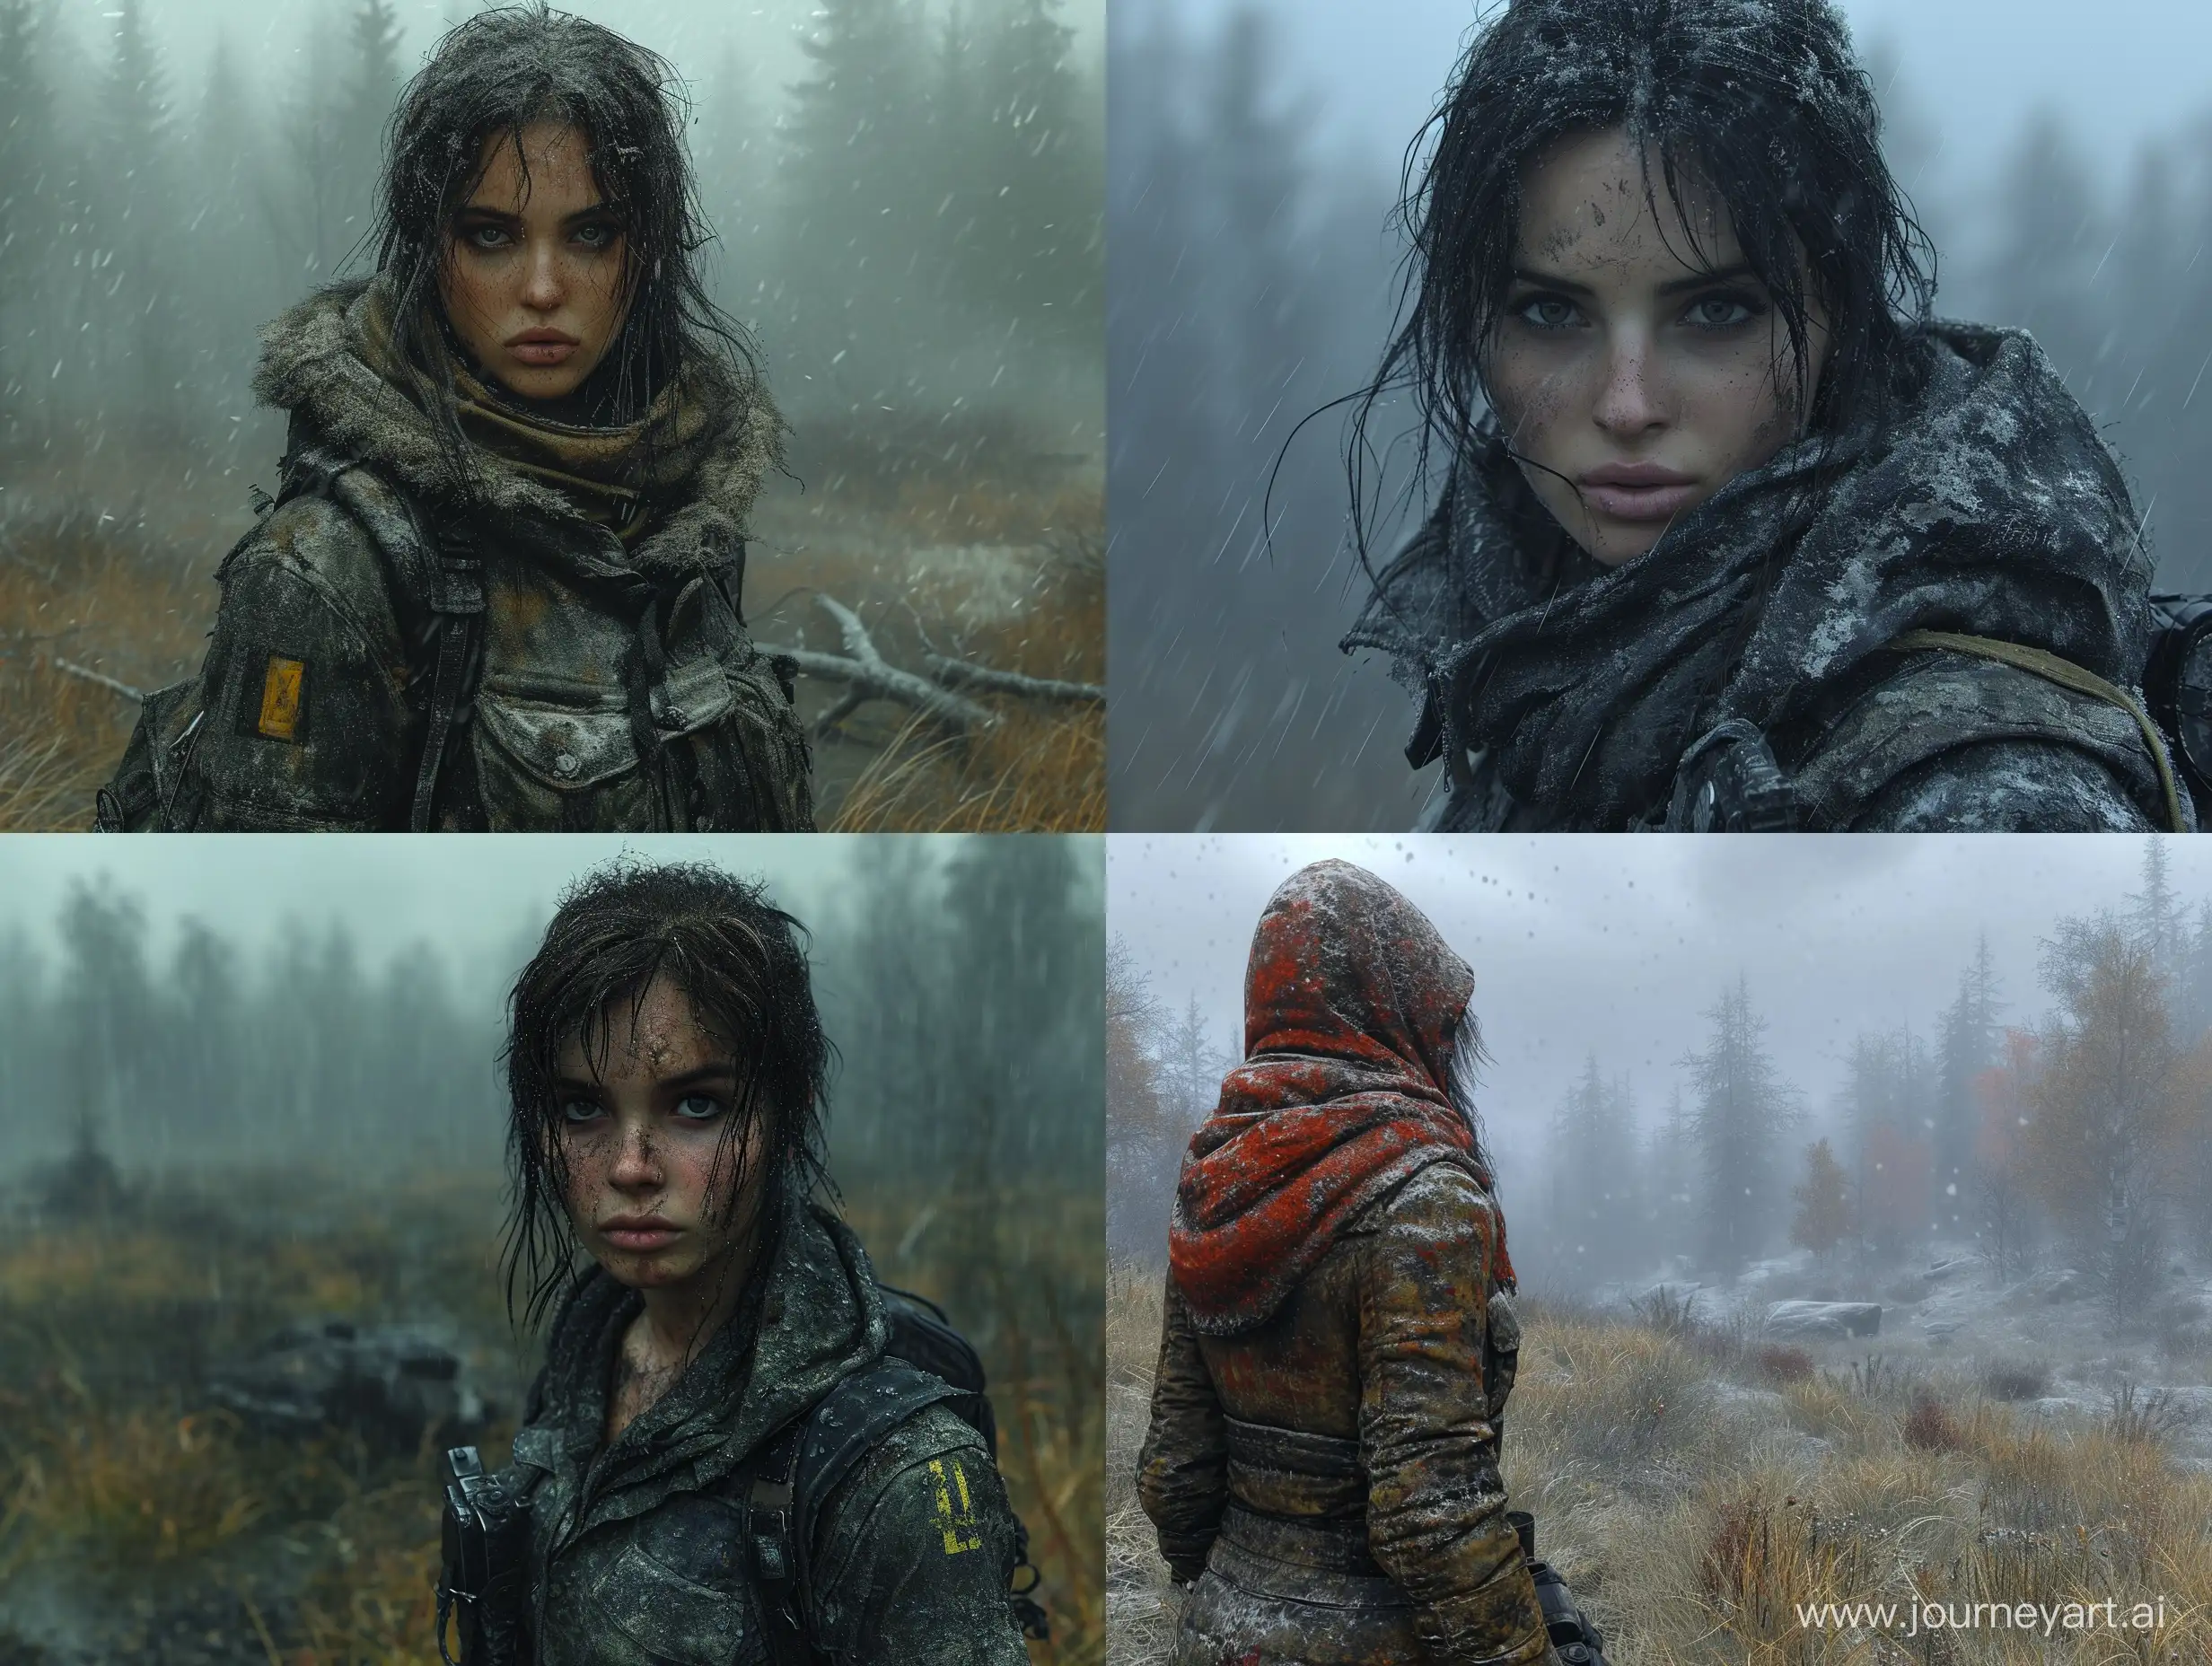 Enigmatic-Female-Mercenary-in-STALKER-Video-Game-Amidst-Dark-Weather-and-Dead-Trees